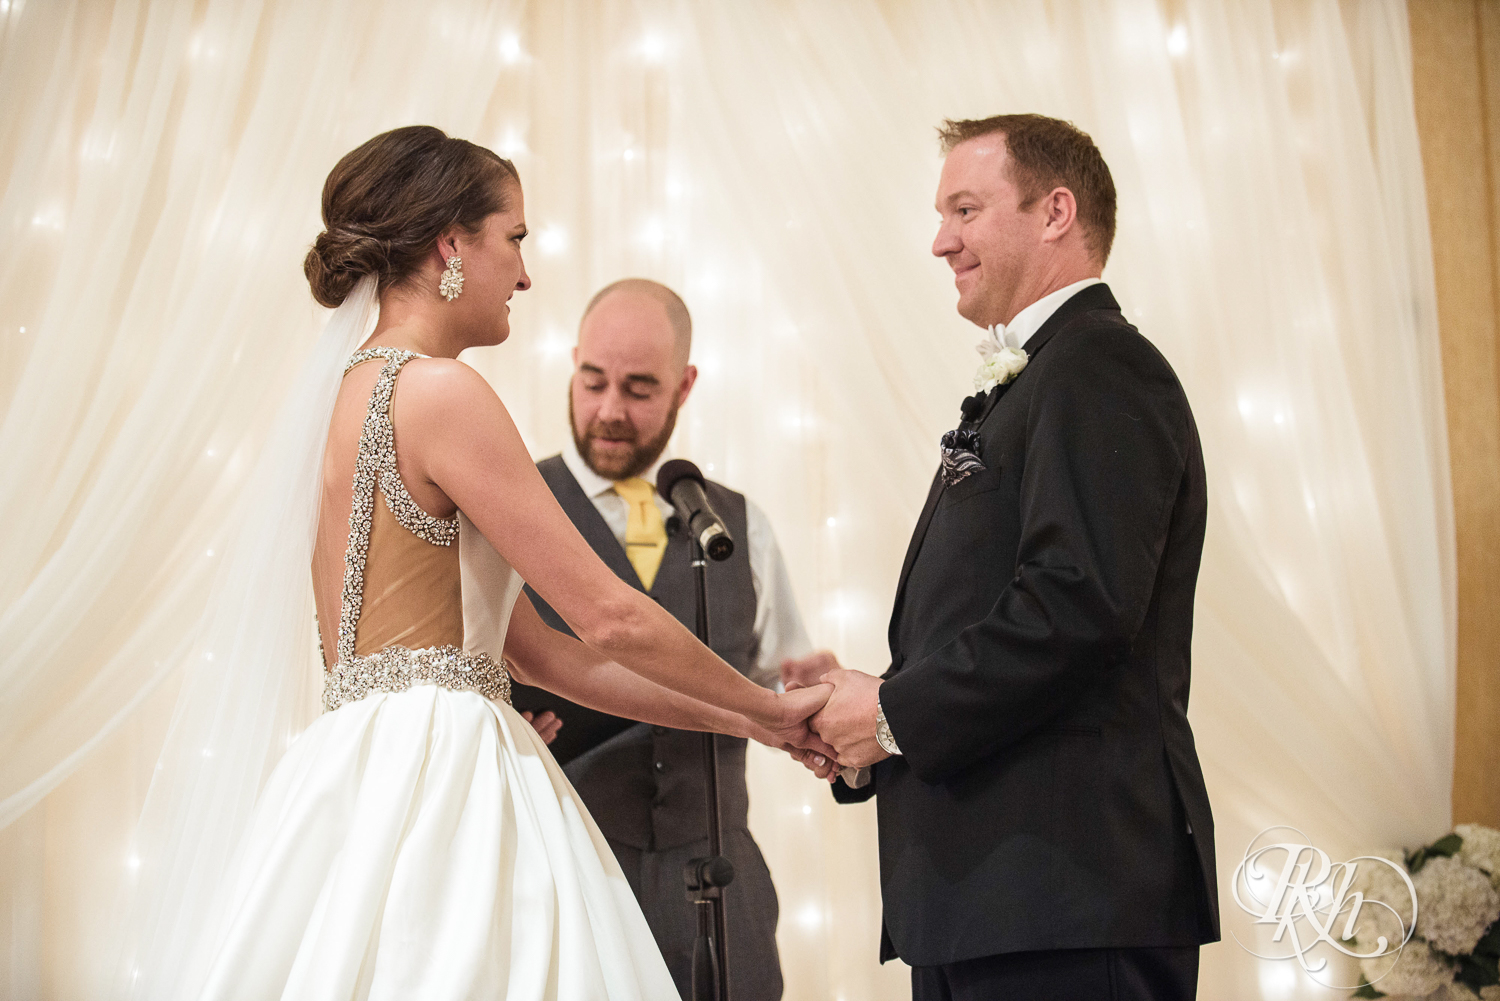 Bride and groom smile during wedding ceremony at The Saint Paul Hotel in Saint Paul, Minnesota.